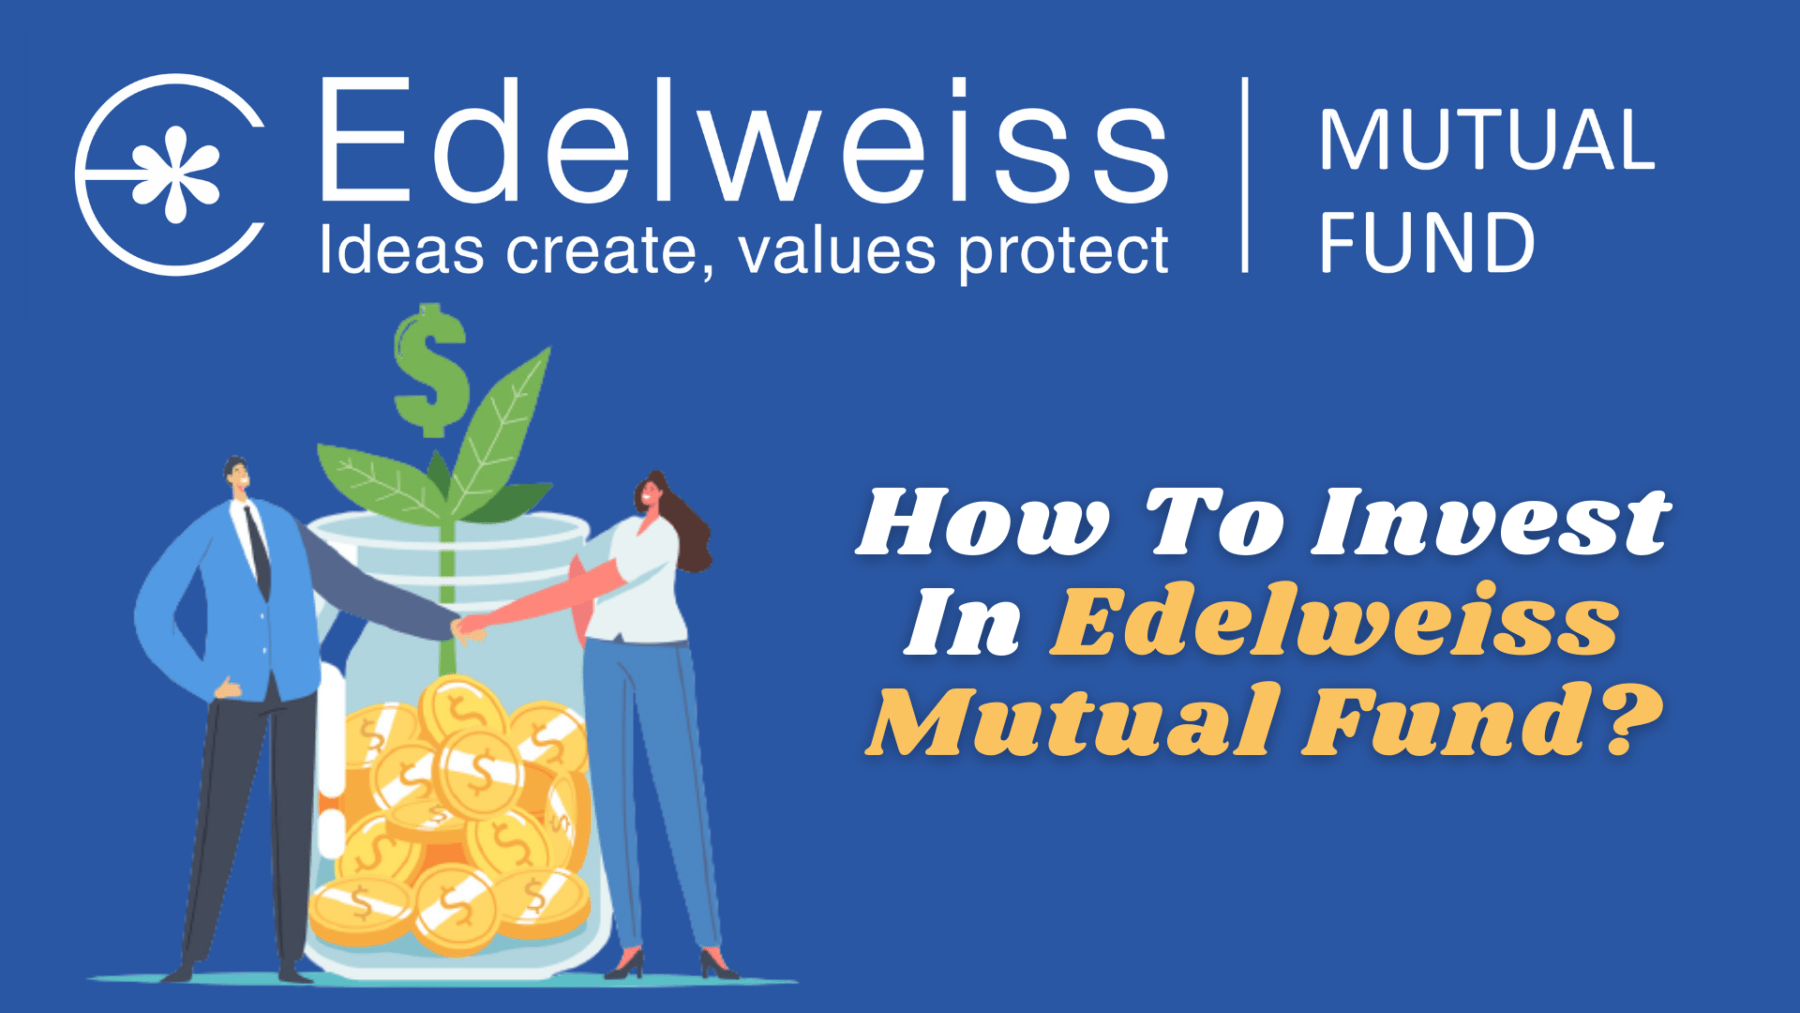 https://www.clubinfonline.com/2021/12/08/how-to-invest-in-edelweiss-mutual-fund/